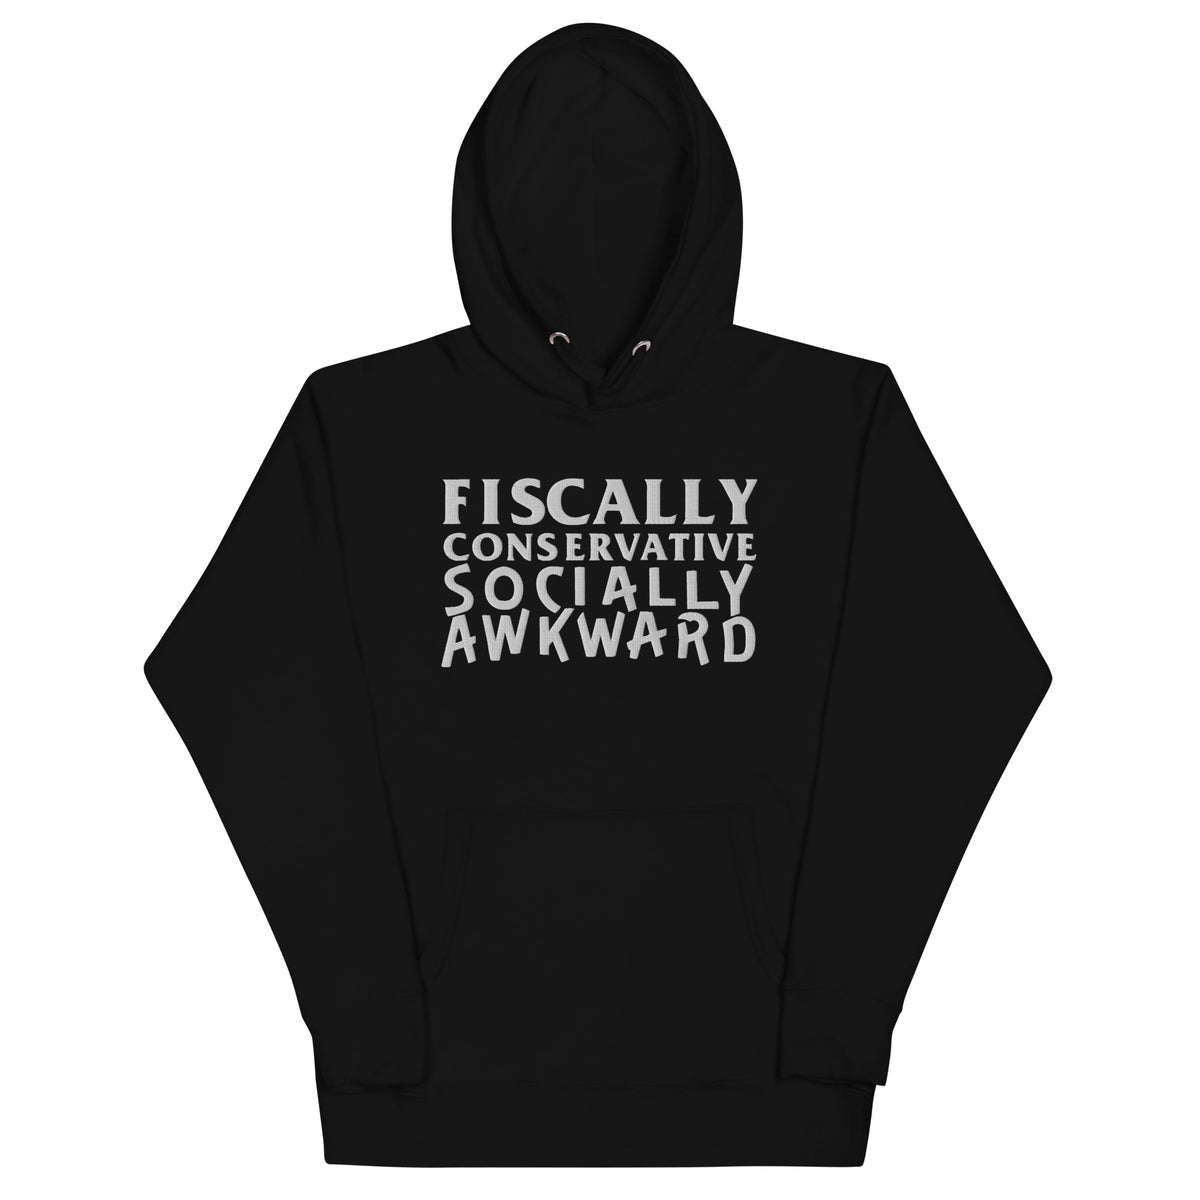 Fiscally Conservative Socially Awkward Embroidered Hoodie